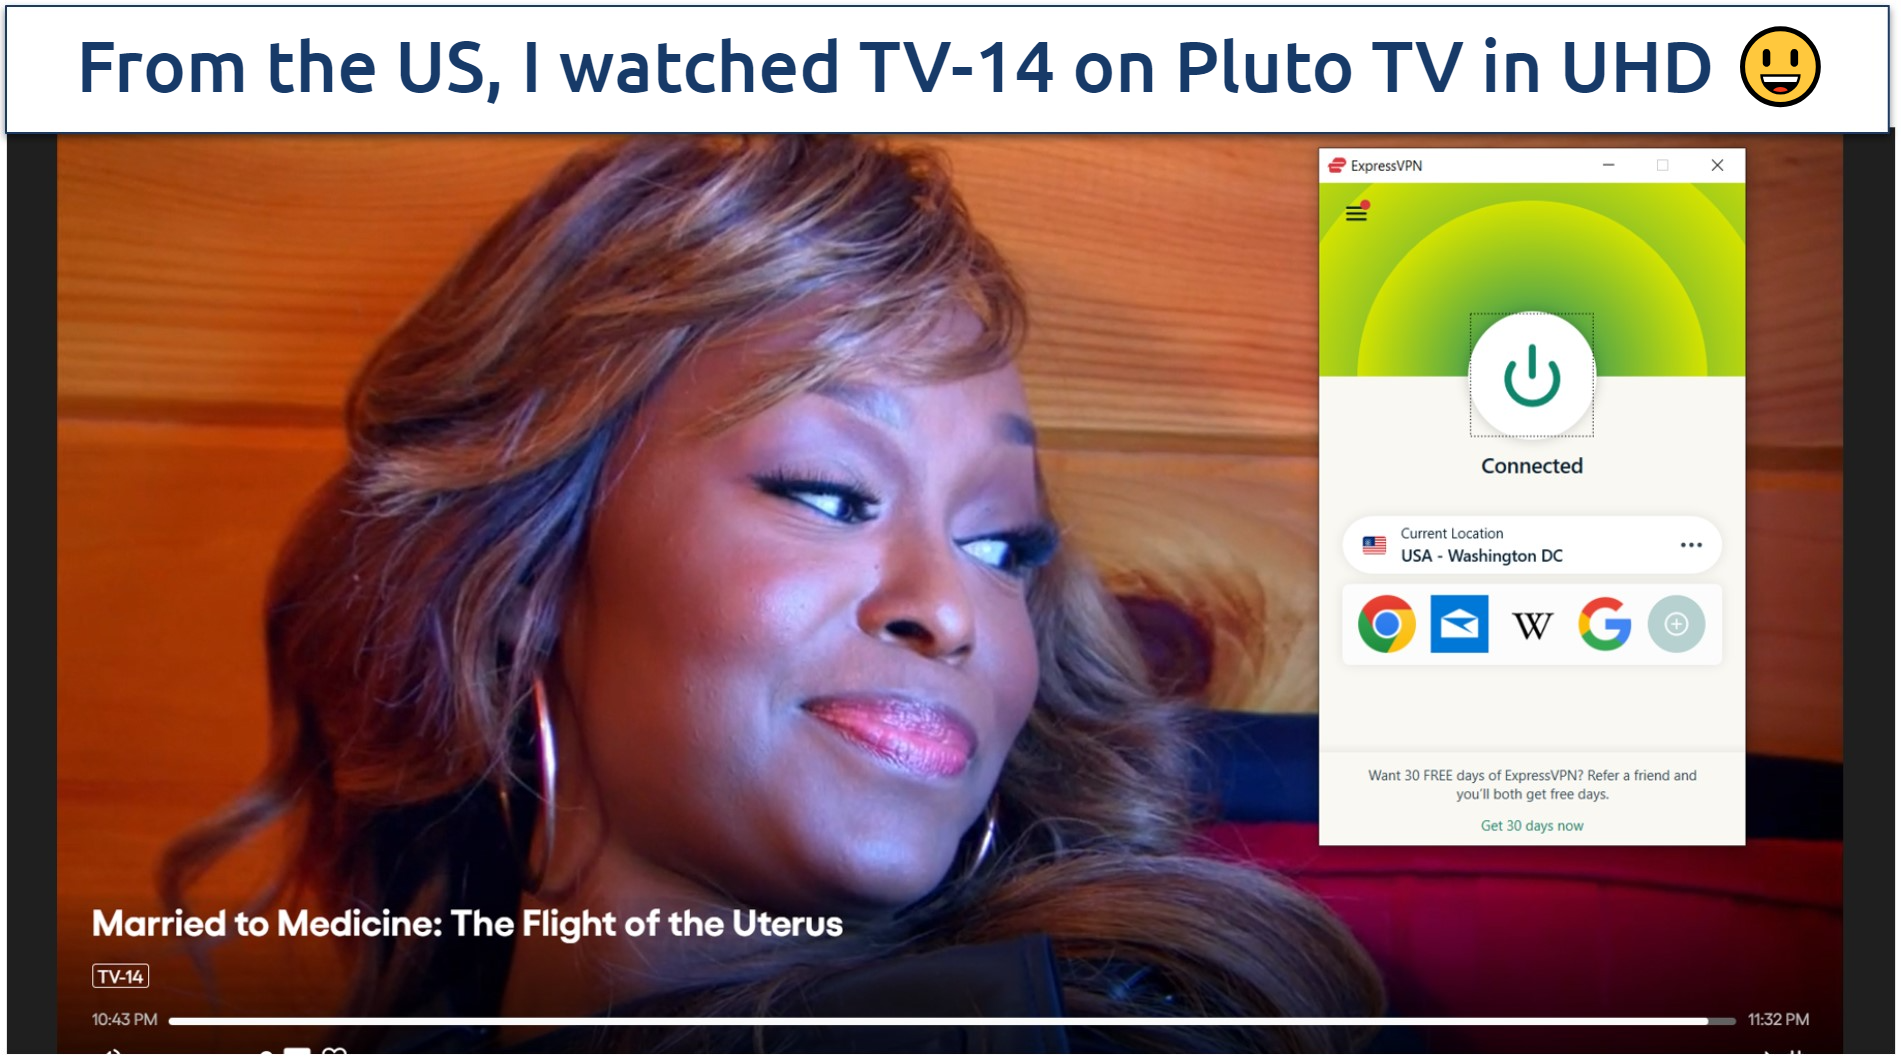 A screenshot of Pluto TV streaming Married to Medicine: The Flight of the Uterus while connected to ExpressVPN's US server